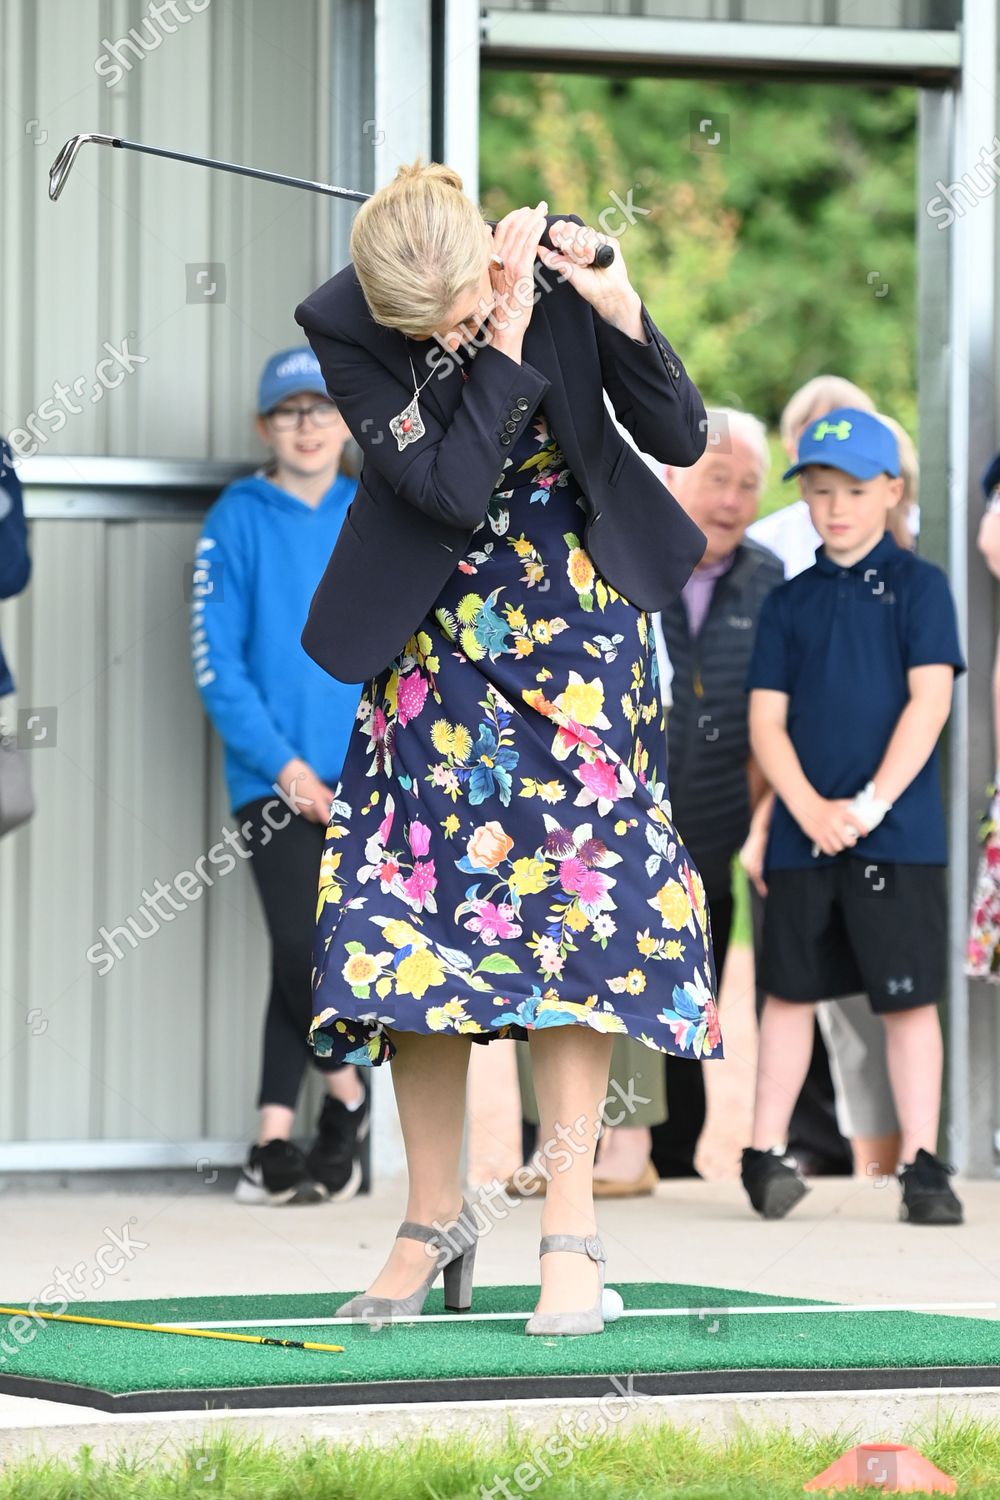 prince-edward-and-sophie-countess-of-wessex-visit-to-forfar-golf-club-scotland-uk-shutterstock-editorial-12172307v.jpg